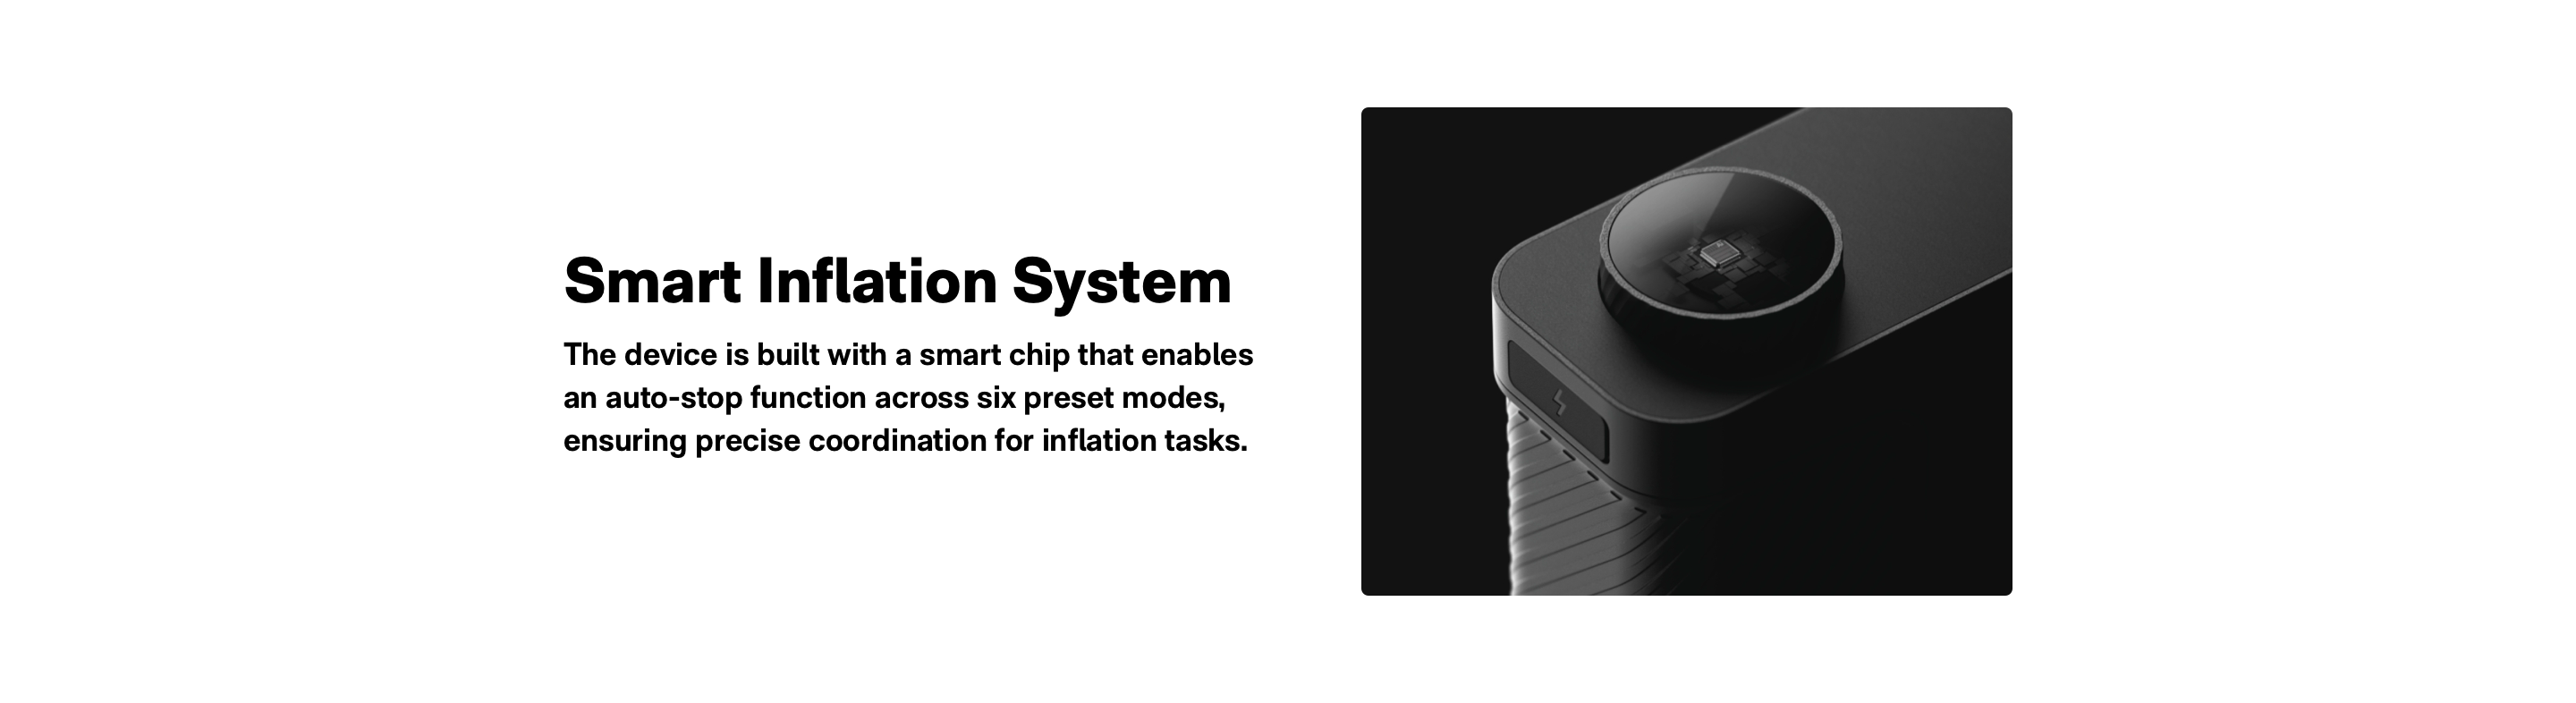 Smart lnflation System: The devtce is built with a smart chip that enables an auto-stop function across six preset modes, ensuring precise coordination for inflation tasks.